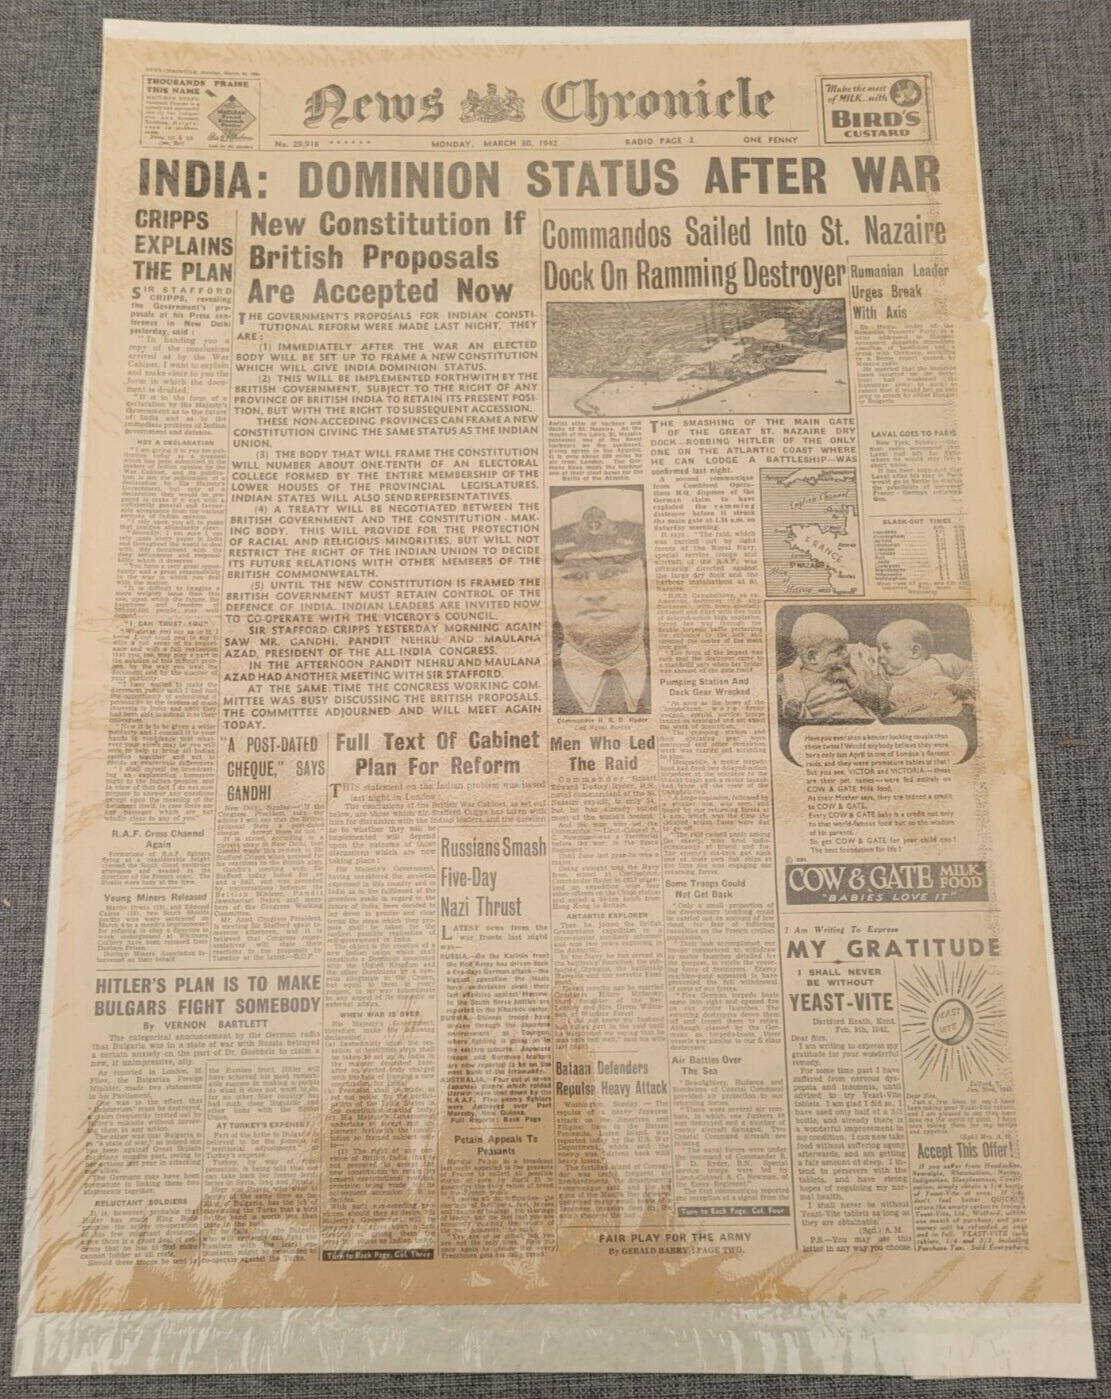 NEWS CHRONICLE INDIA DOMINION STATUS AFTER WAR GHANDI 30TH MARCH 1942 NEWSPAPER